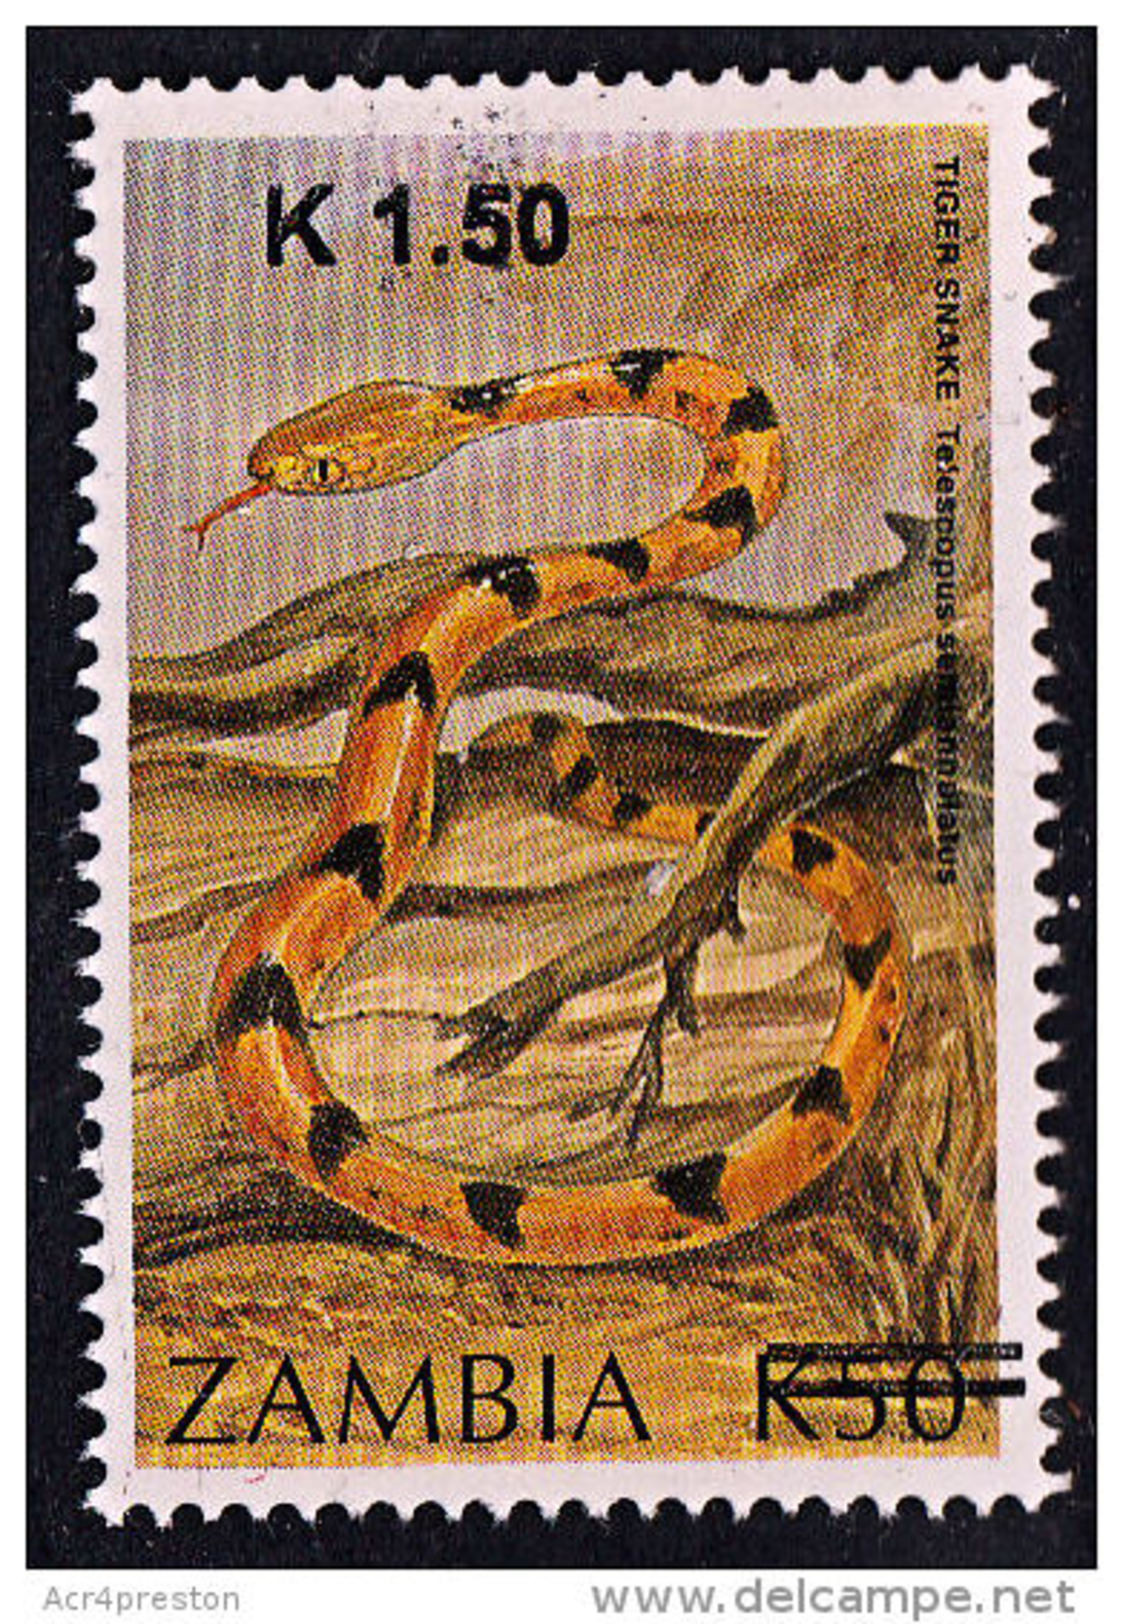 Zm1123 ZAMBIA 2014, NEW ISSUE K1.50 On K50 Tiger Snake  MNH (Issued 02-05-2014) - Zambia (1965-...)